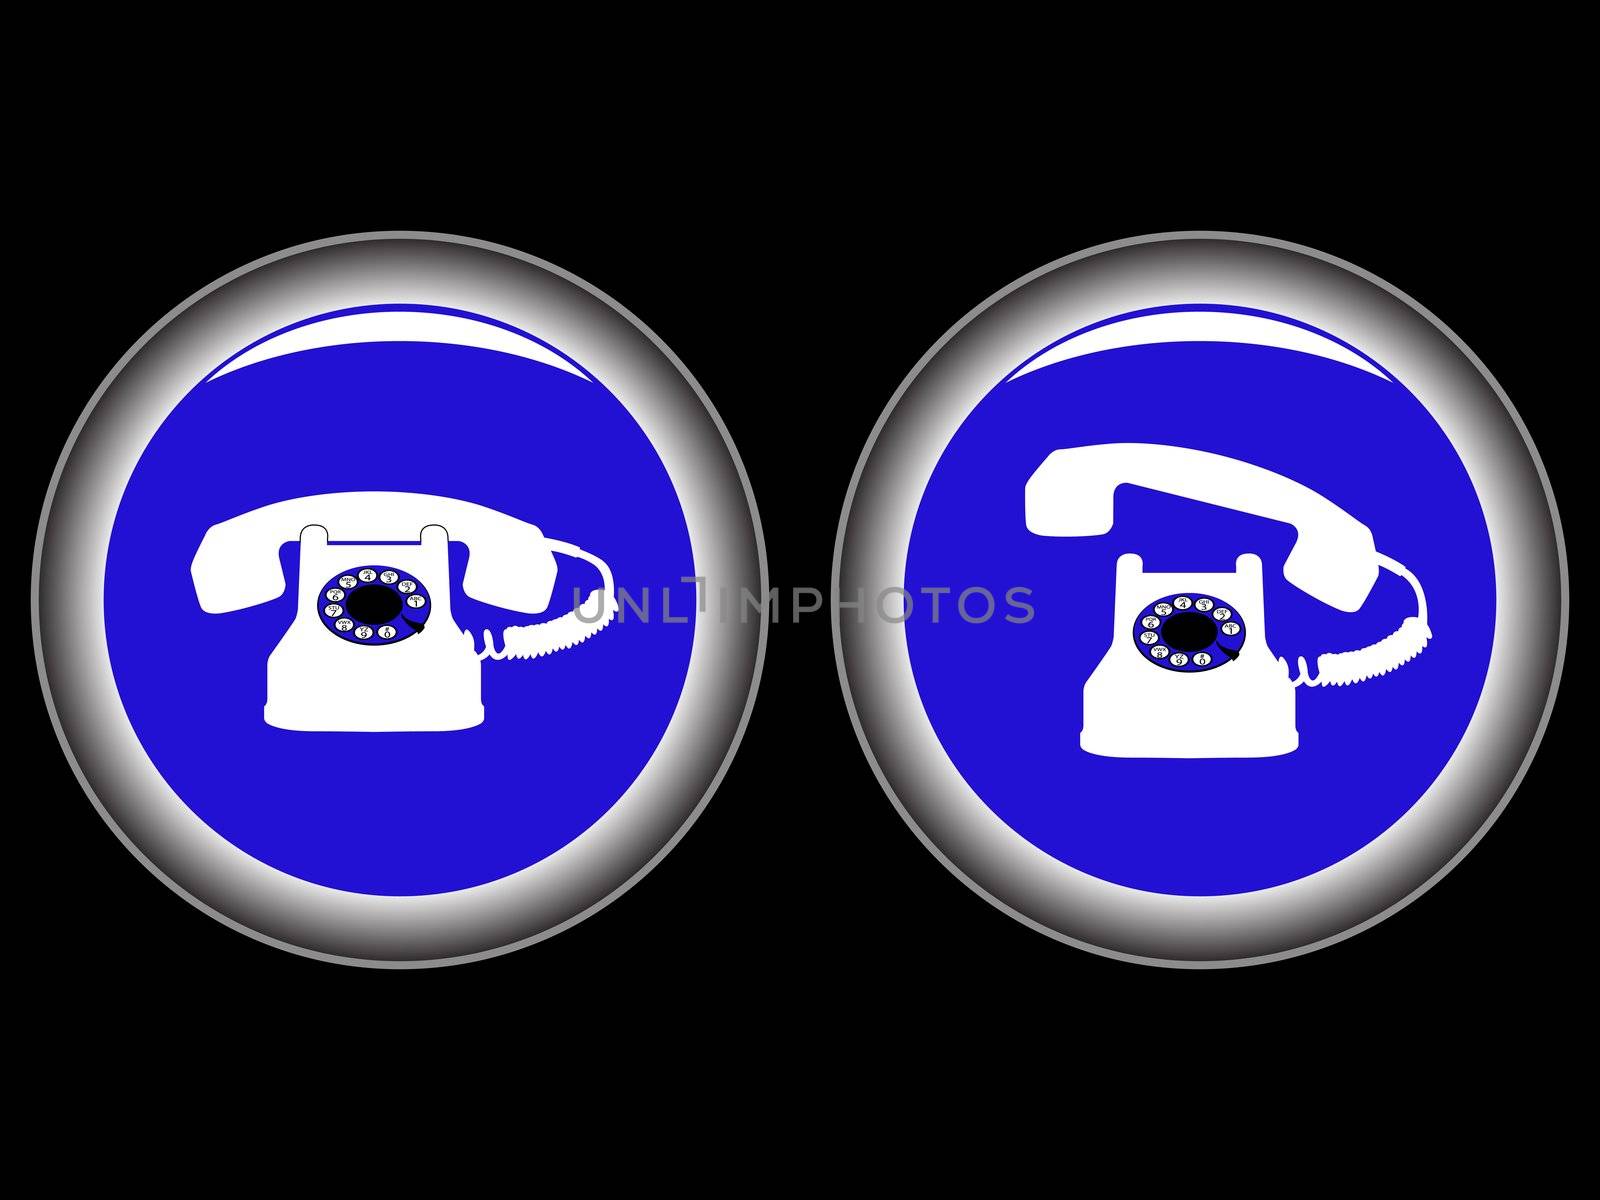 telephone blue icons against black background, abstract vector art illustration